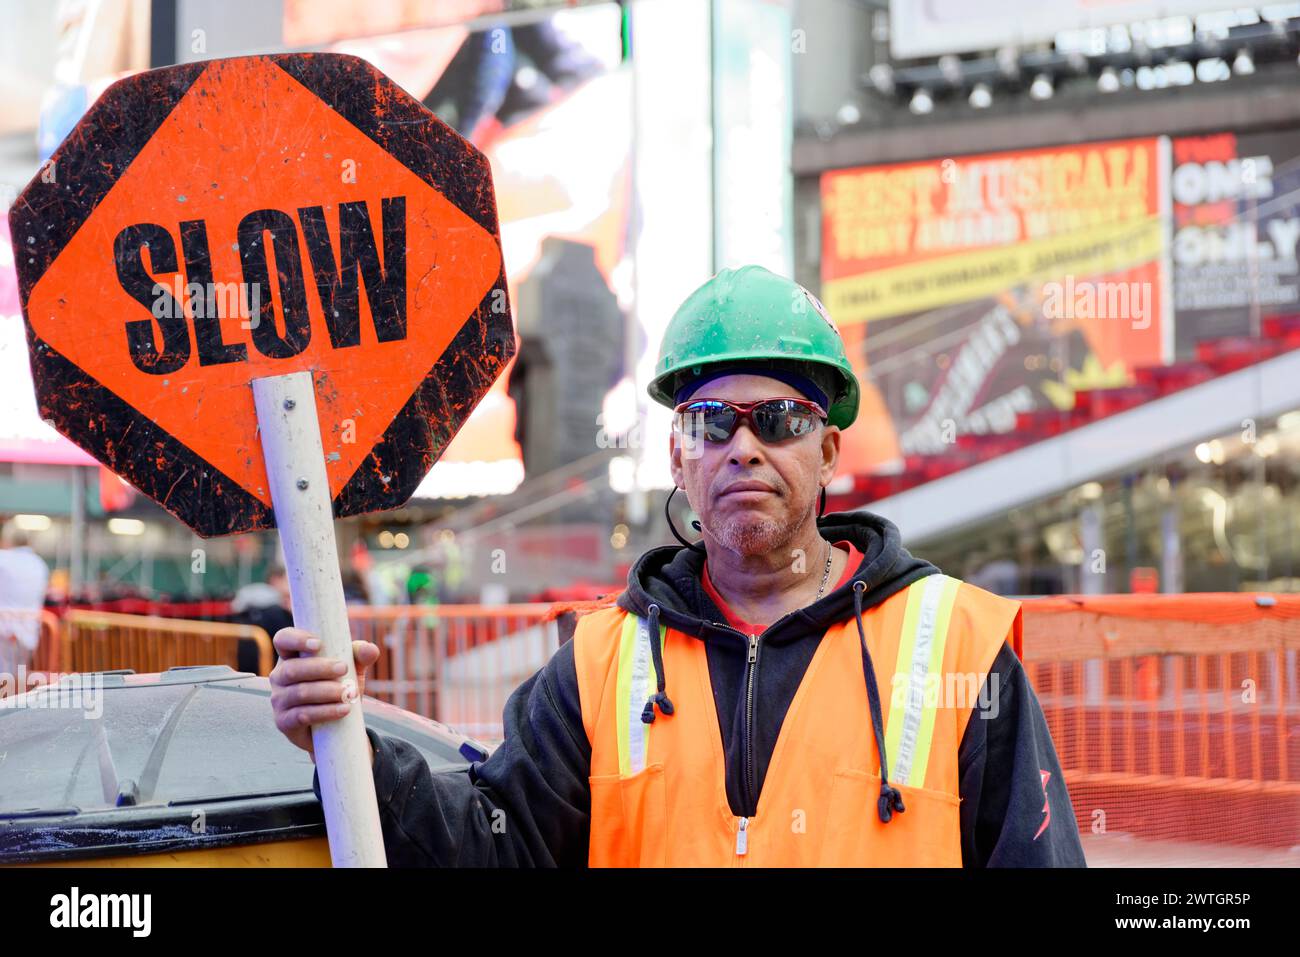 A construction worker holds a 'Slow' warning sign and wears a safety waistcoat and helmet, Manhattan, New York City, New York, USA, North America Stock Photo